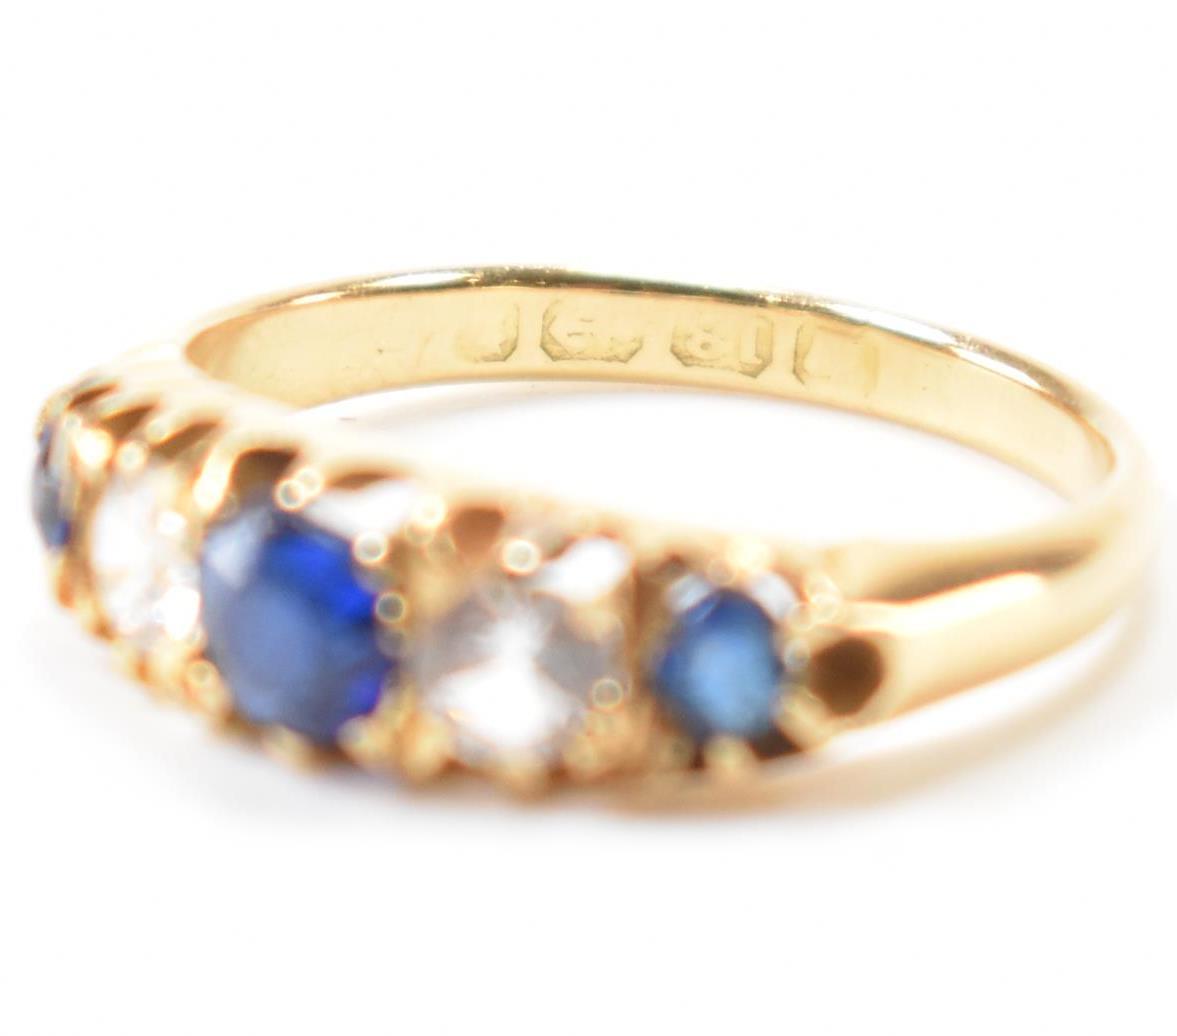 HALLMARKED 18CT GOLD BLUE & WHITE STONE RING - Image 6 of 8